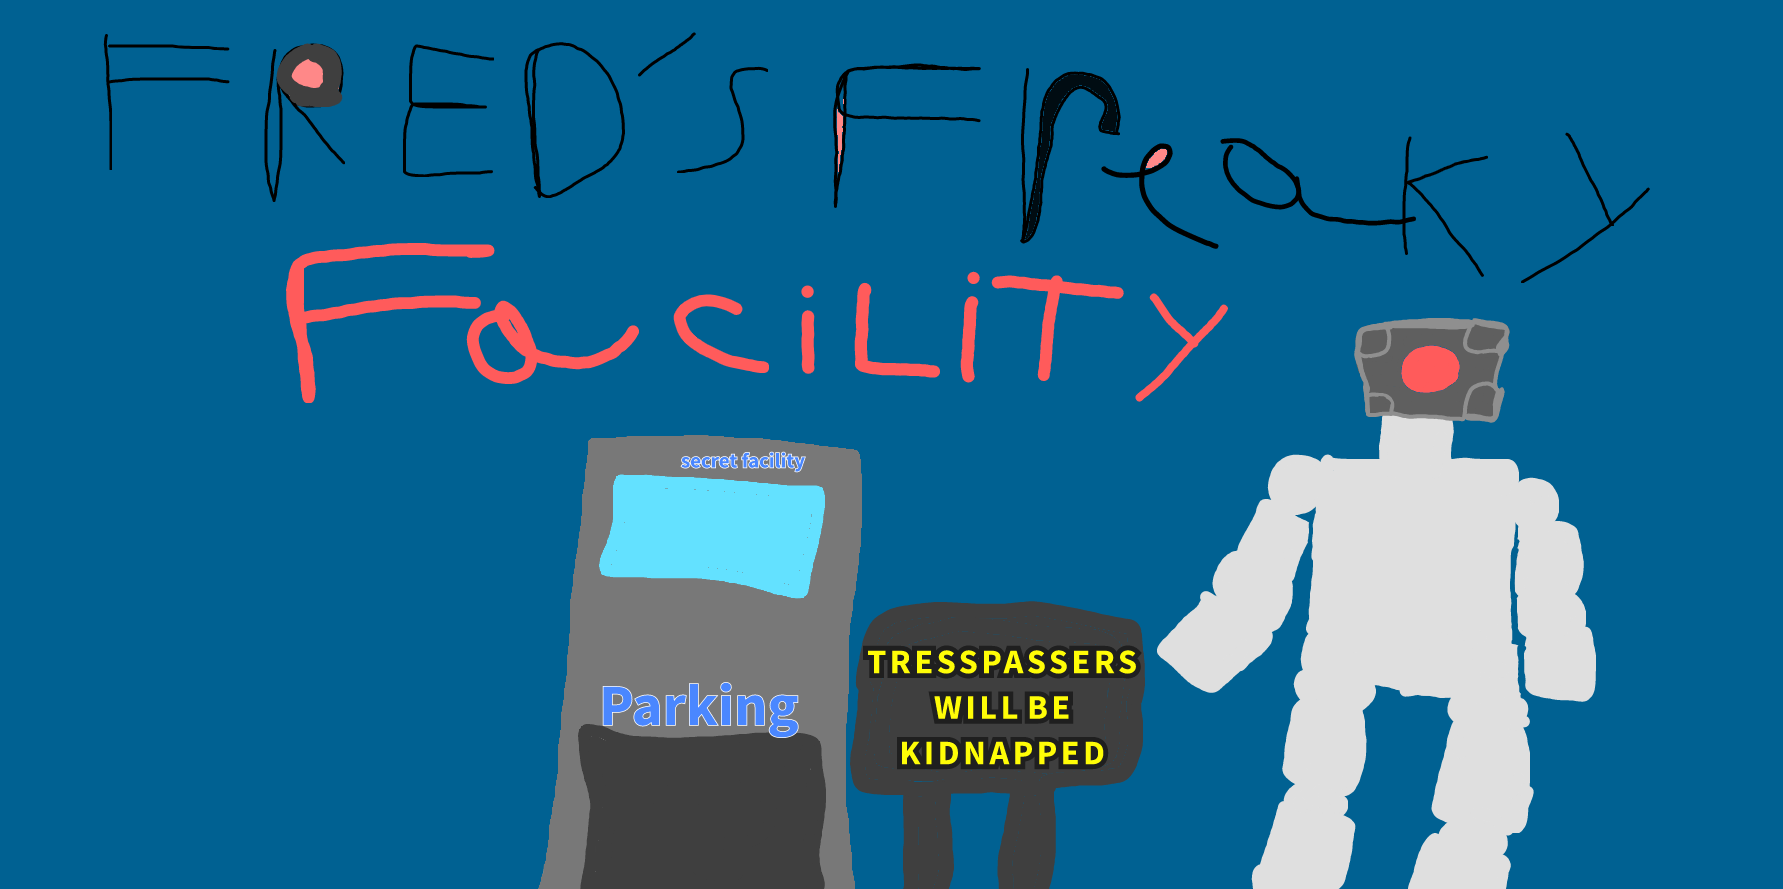 FRED's Freaky Facility